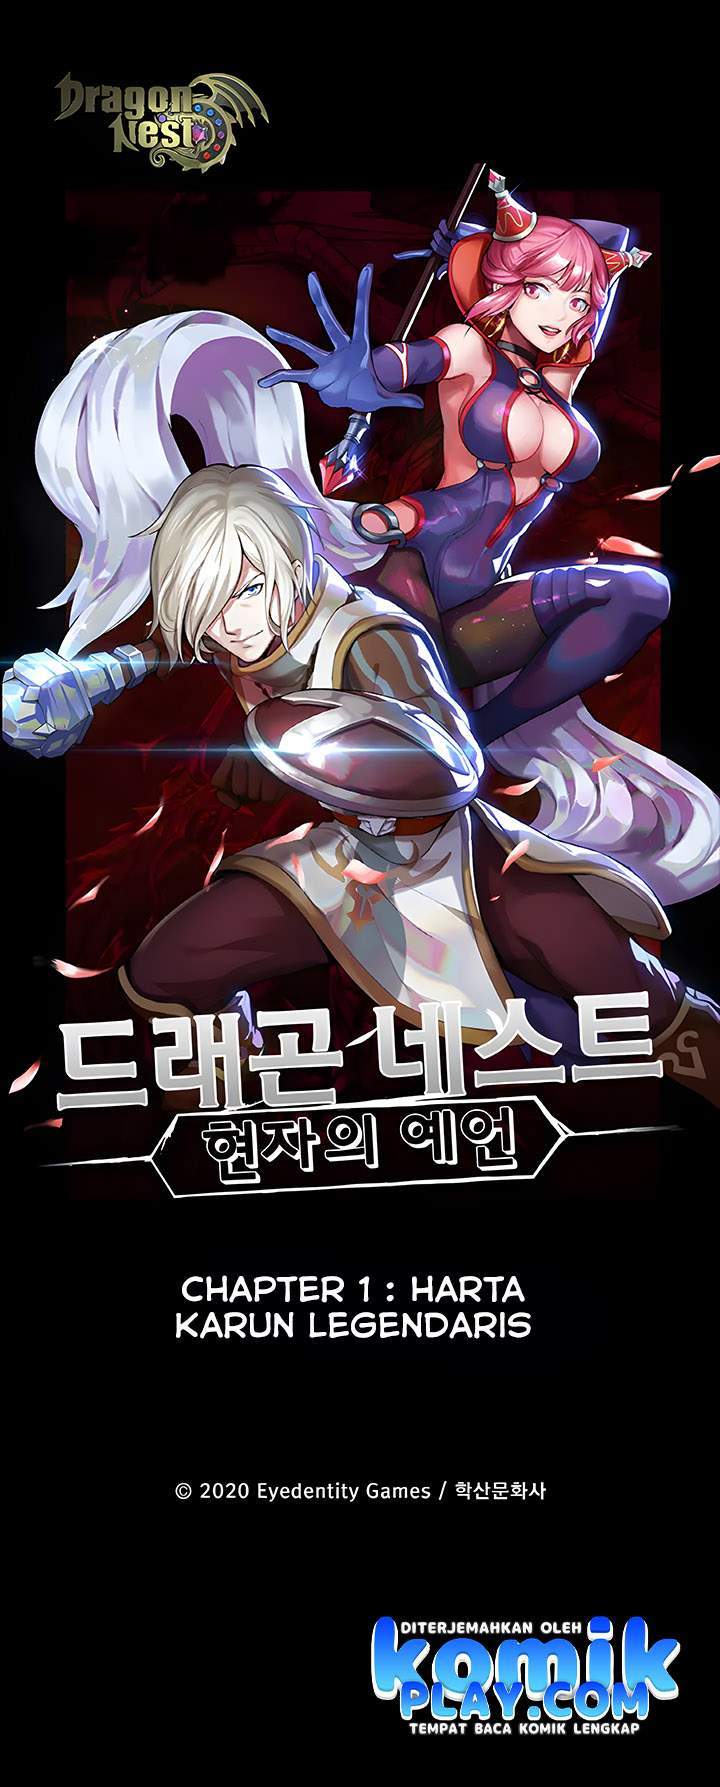 Dragon Nest Sage Prophecy Chapter 1